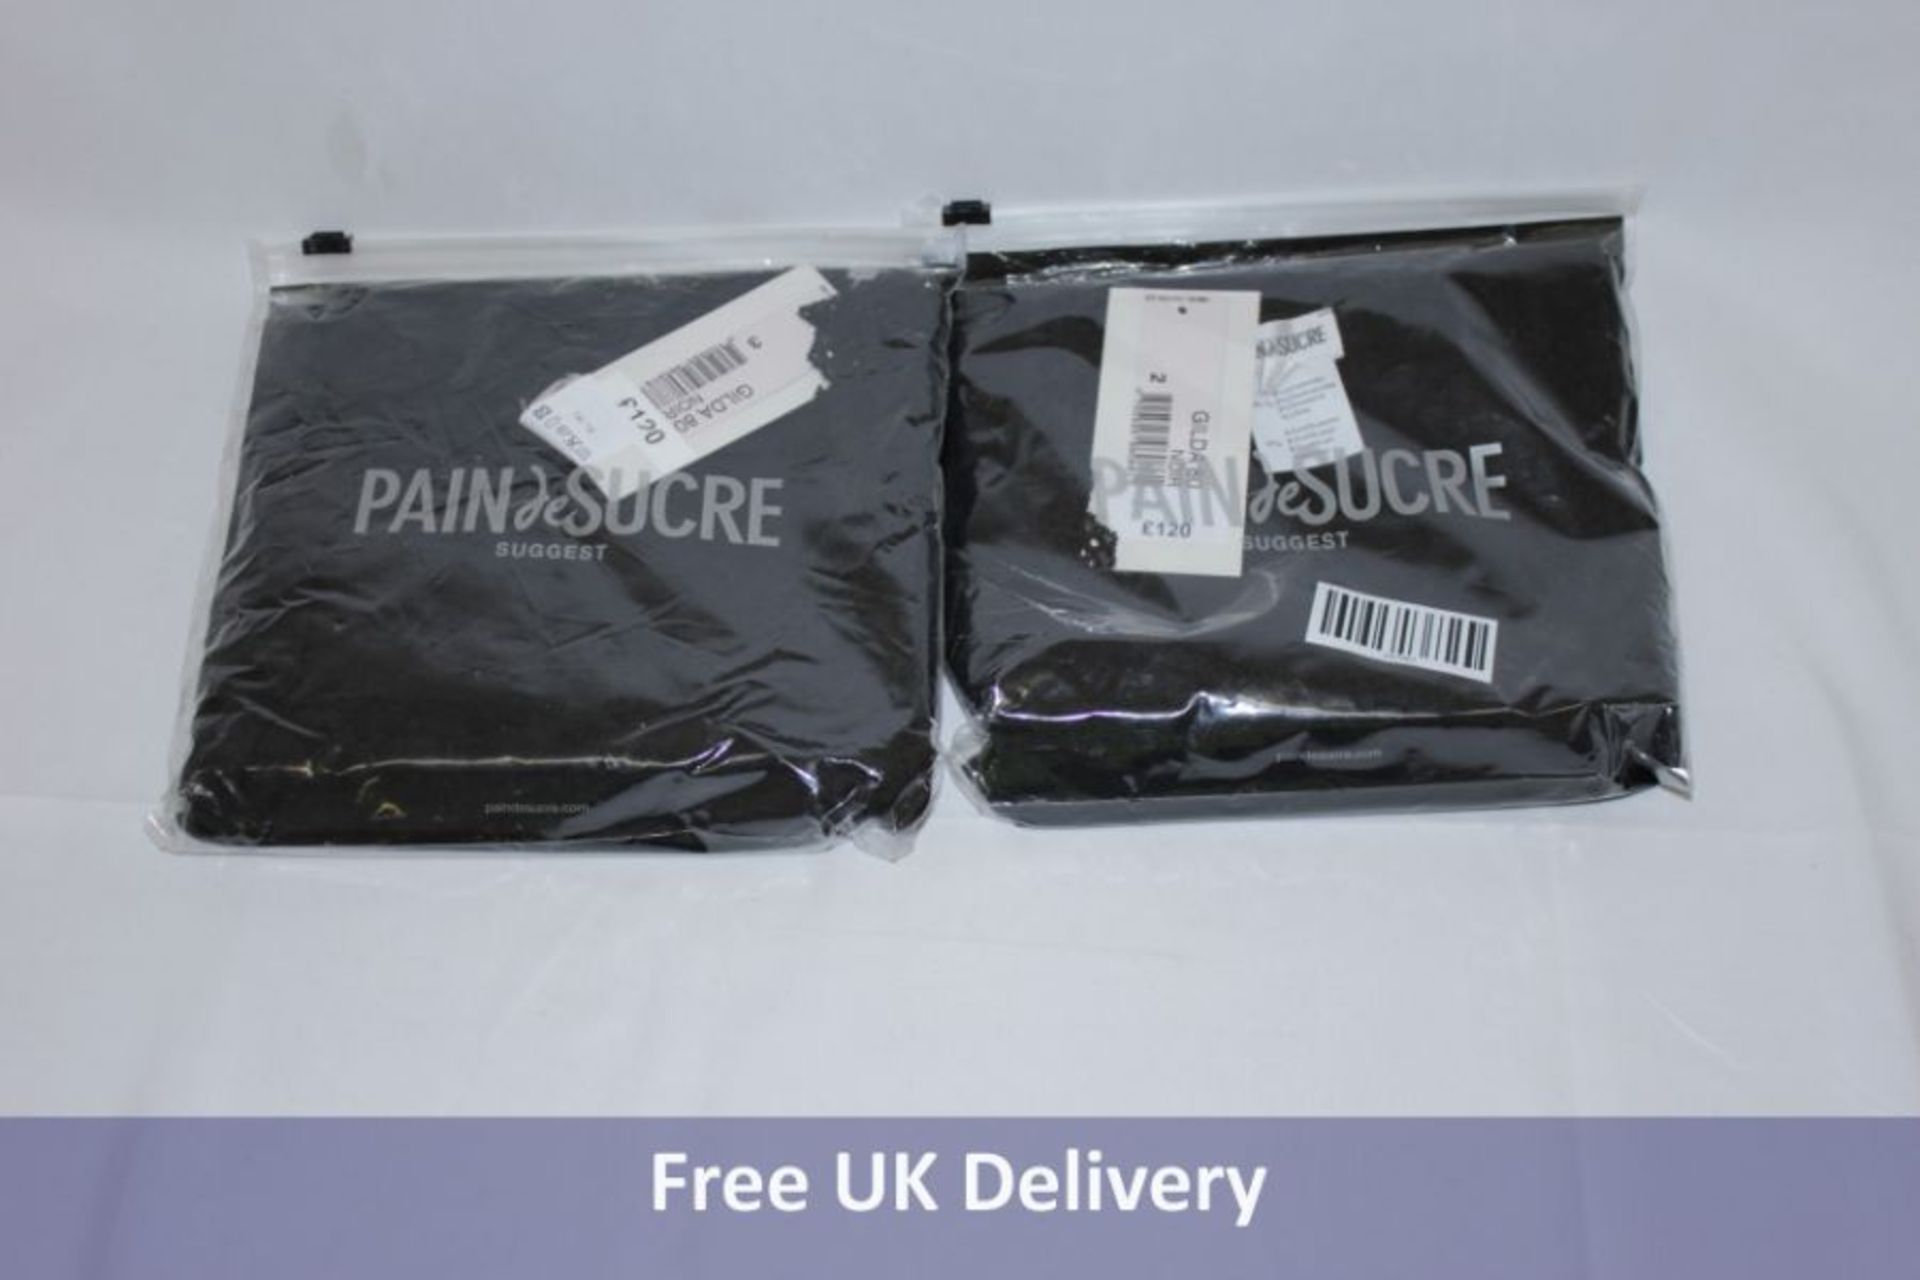 Two Pain De Sucre Gilda 80 Noir Long Sleeved Tops, Black to include 1x Size S and 1x Size M